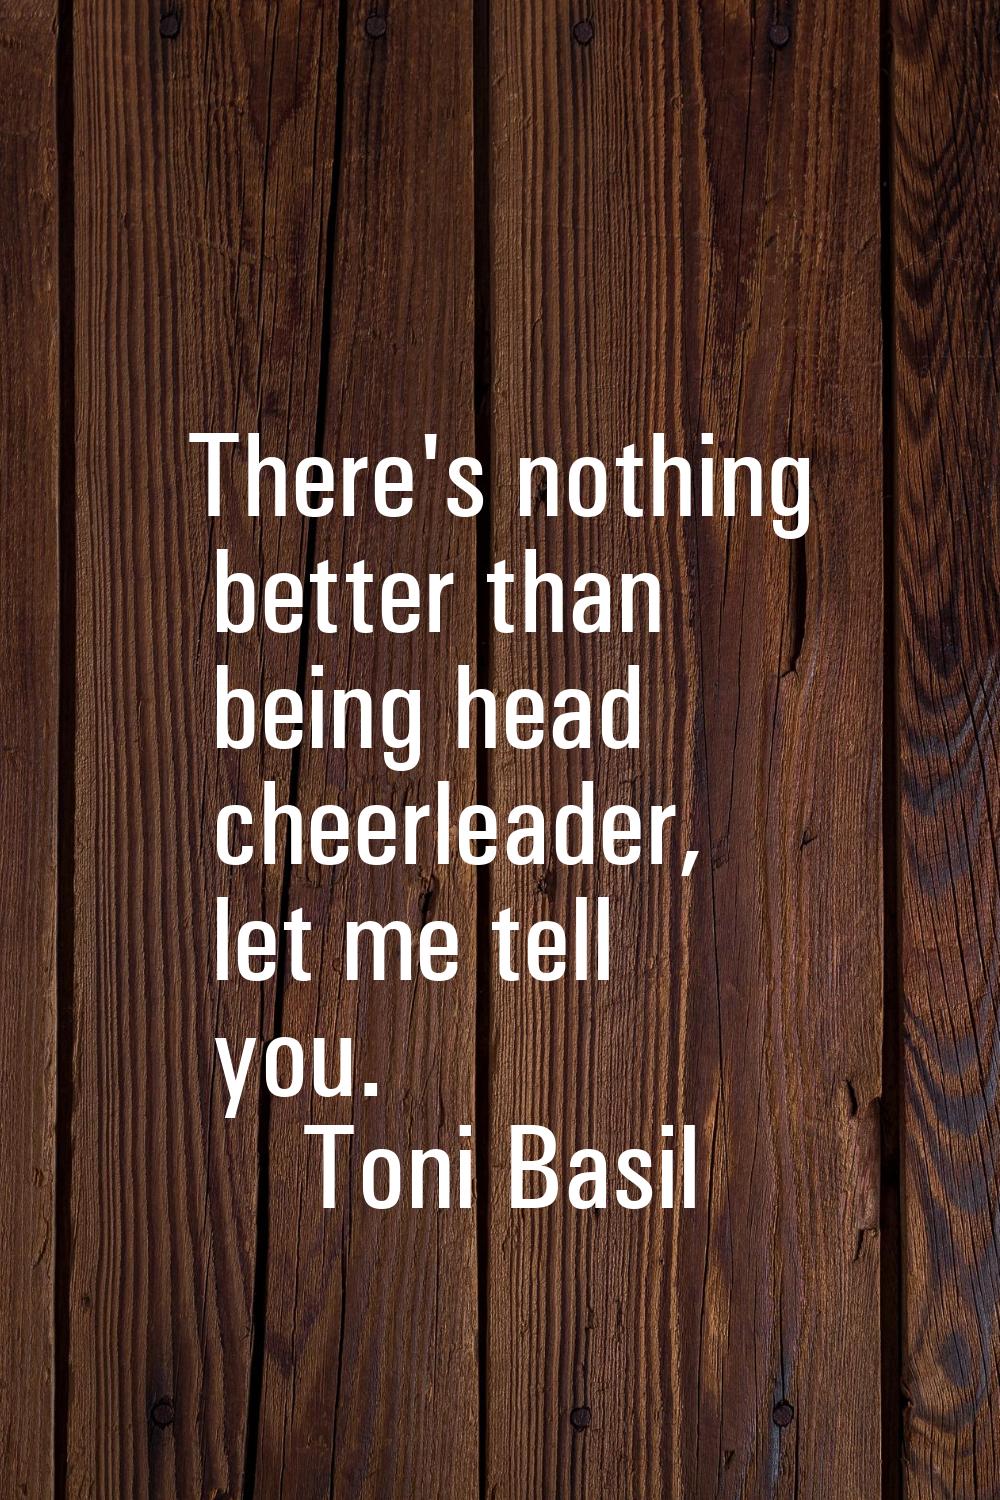 There's nothing better than being head cheerleader, let me tell you.